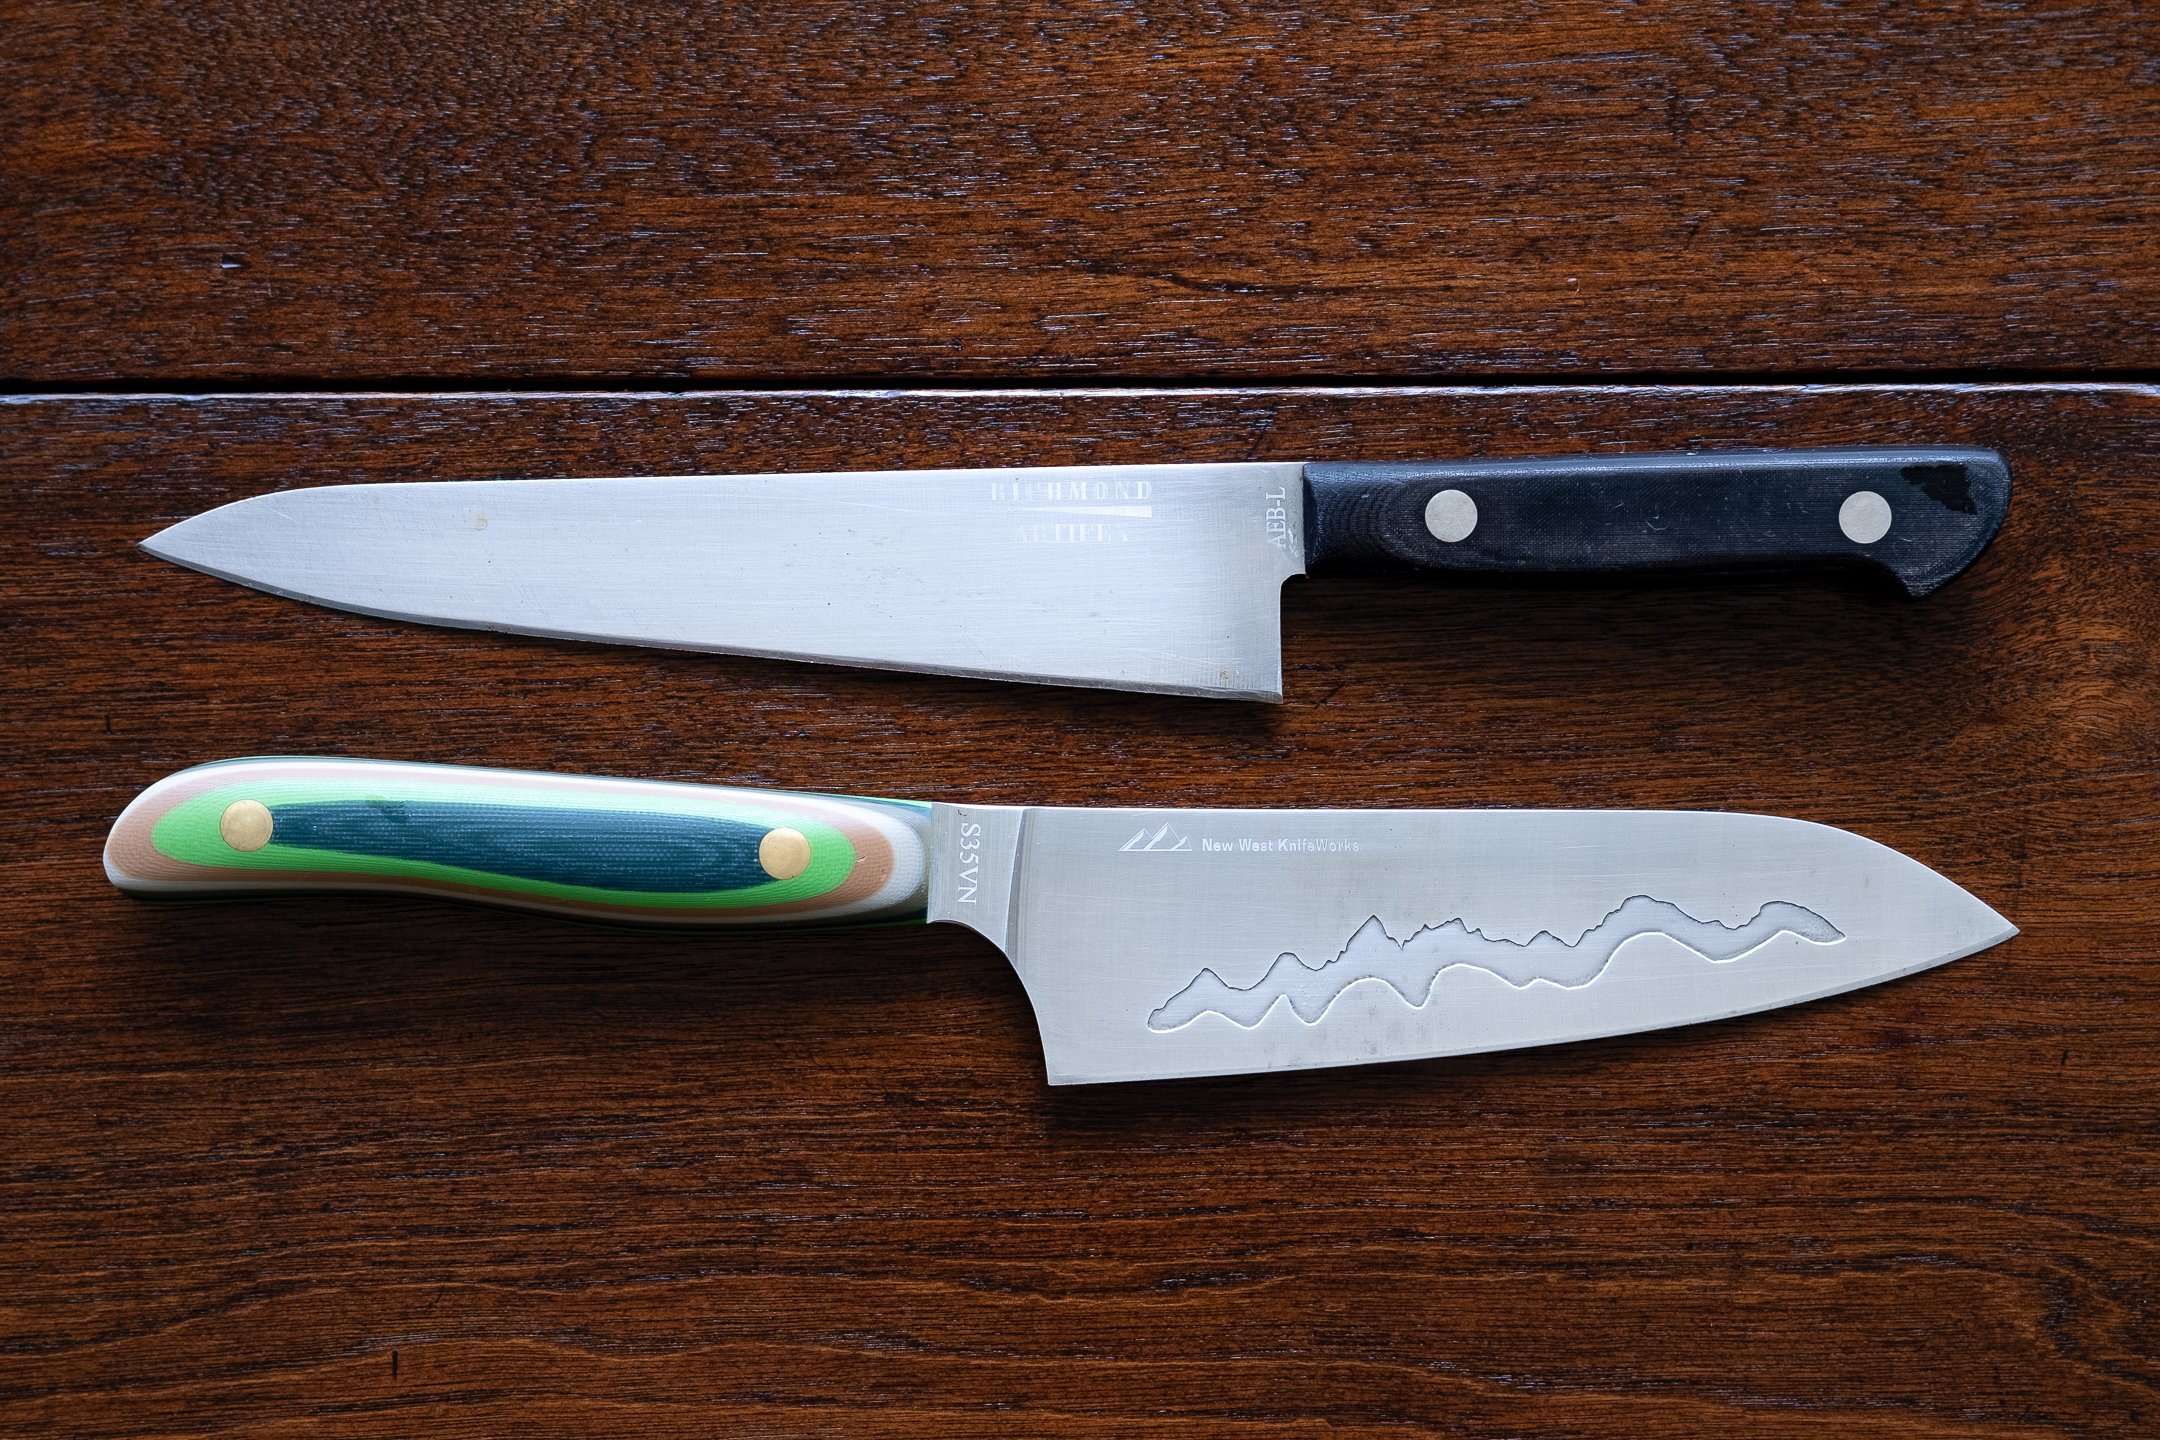 Best Knives for Cutting Fish